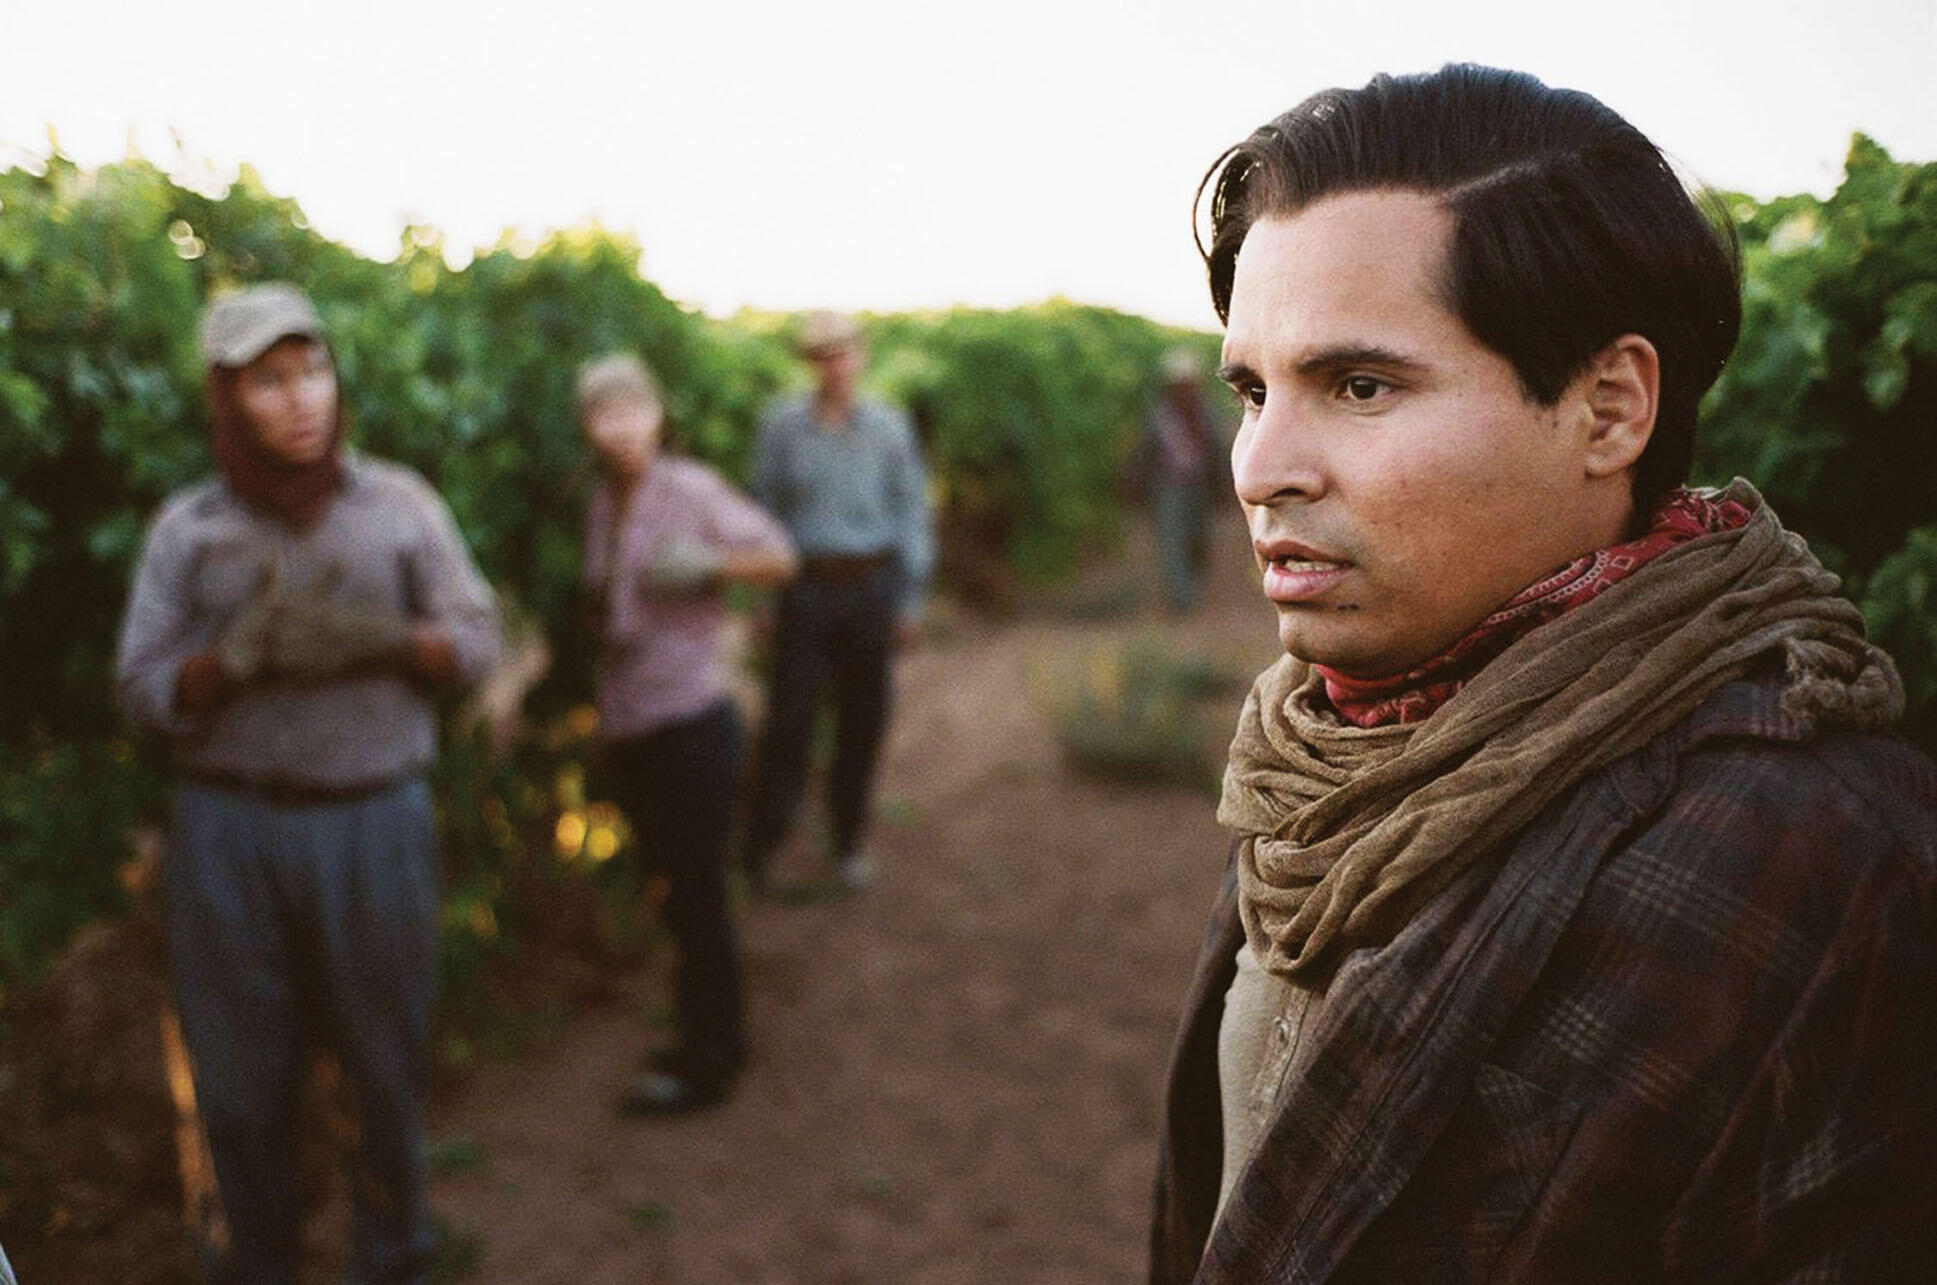 In a still image from the fillm, Michael Peña as Cesar Chavez working in the fields. (Photo courtesy of Canana Films.)